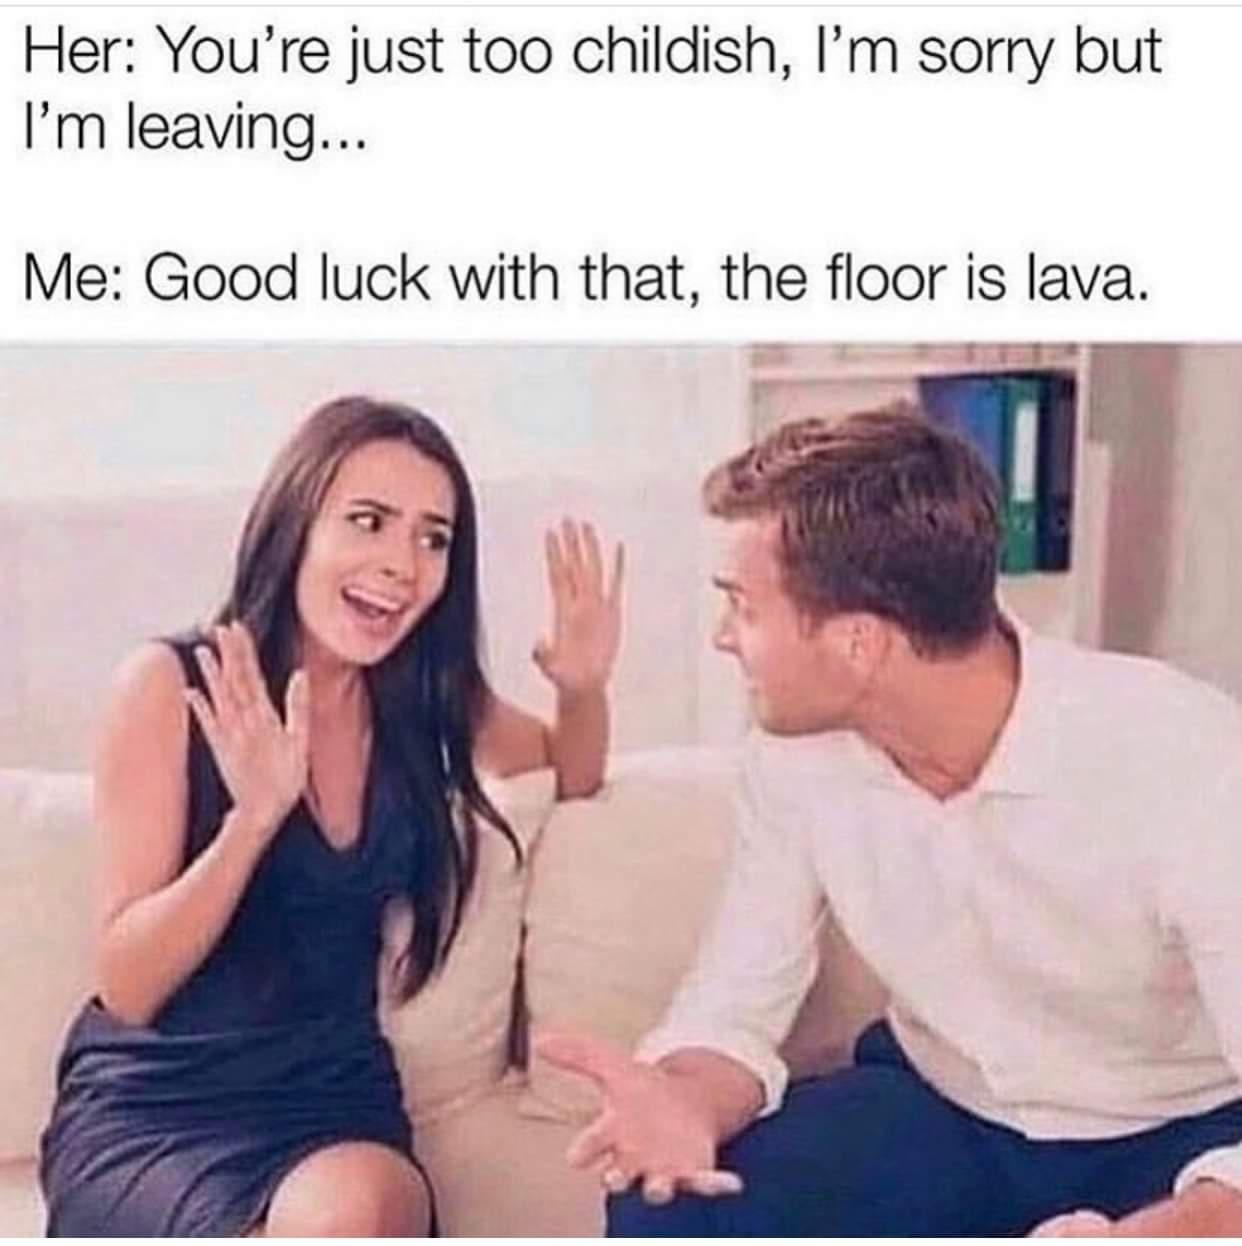 fresh memes - funny memes - immature memes - Her You're just too childish, I'm sorry but I'm leaving... Me Good luck with that, the floor is lava.